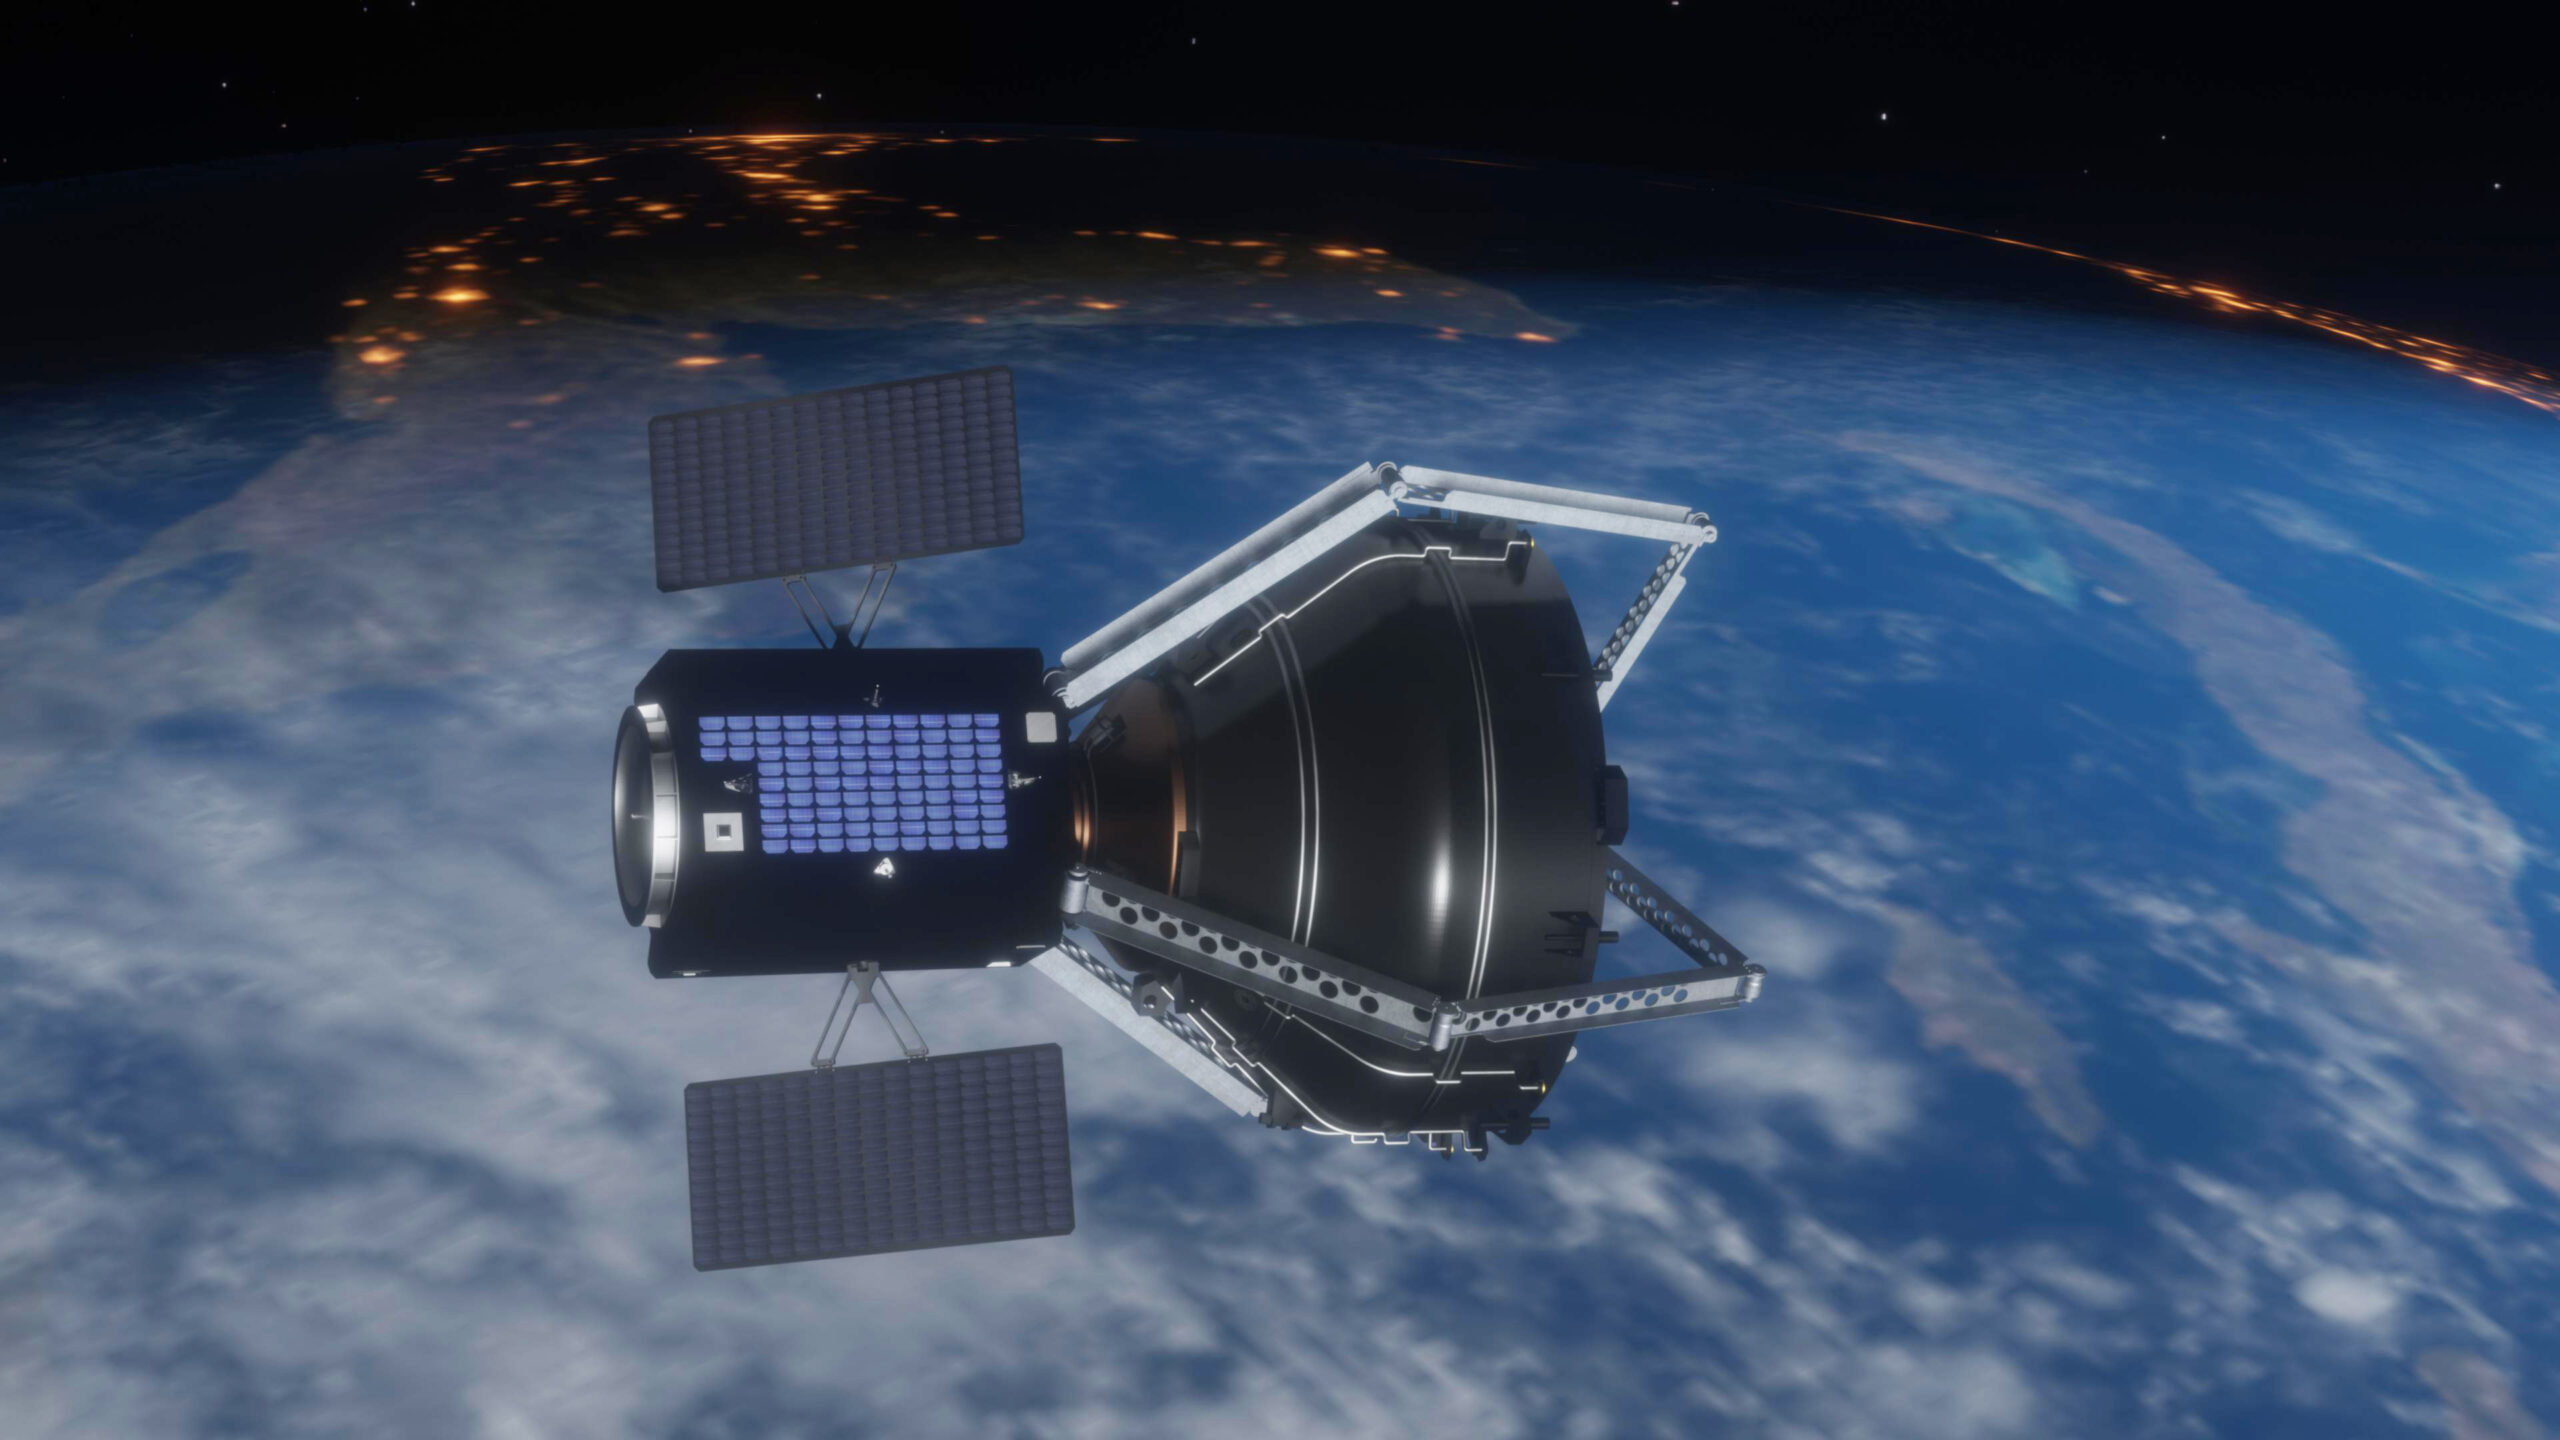 Clearspace 1 satellite 3d model in space